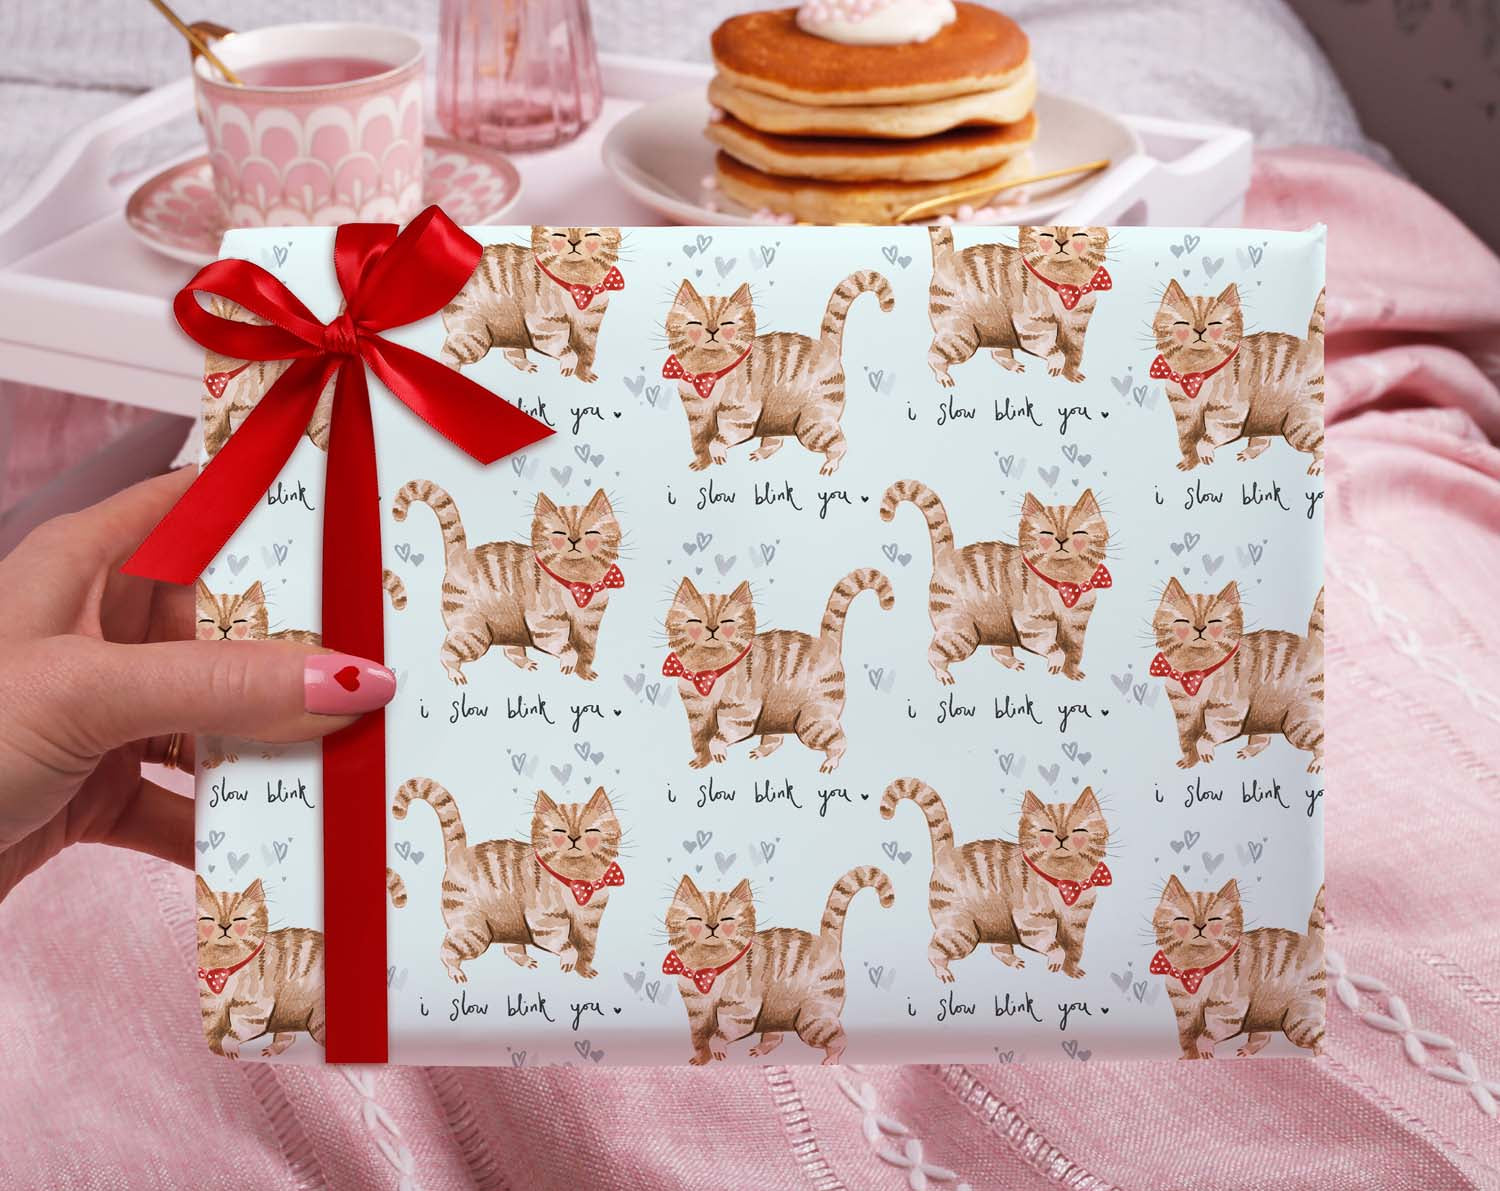 Blue Cat Slow Blink You Wrapping Paper